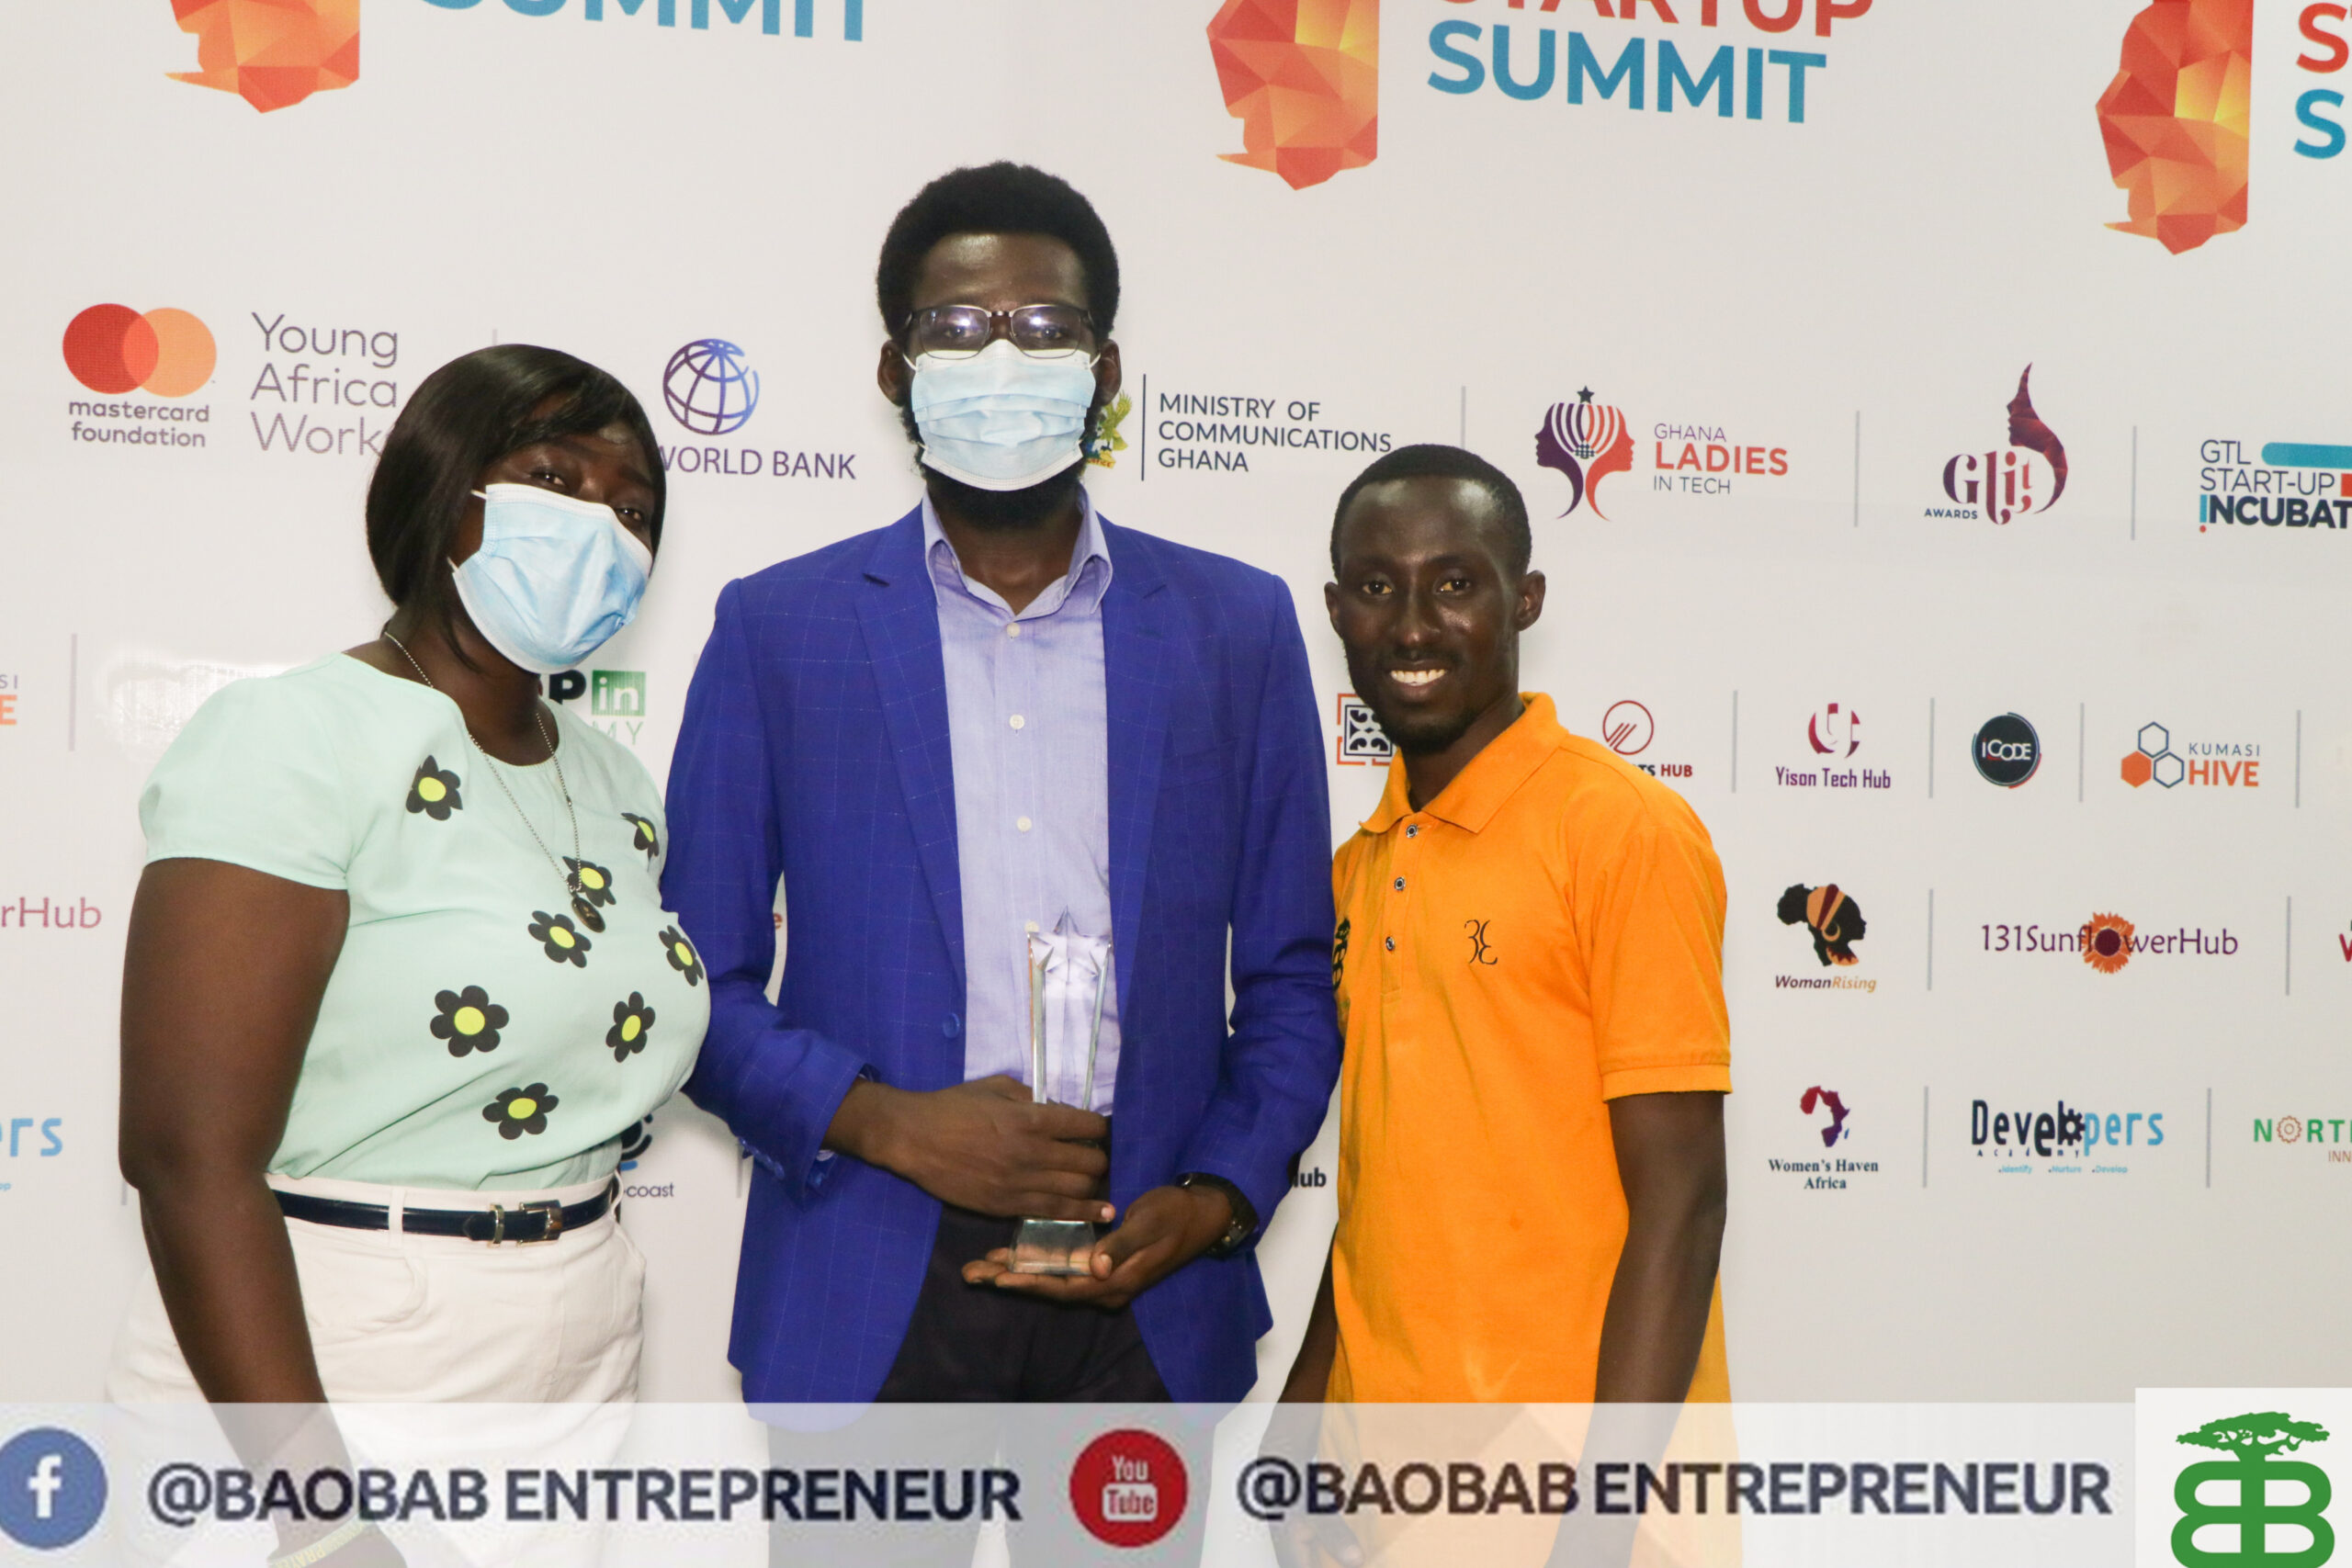 Northern Innovation lab signed a partnership deal with Baobab Entrepreneur today.